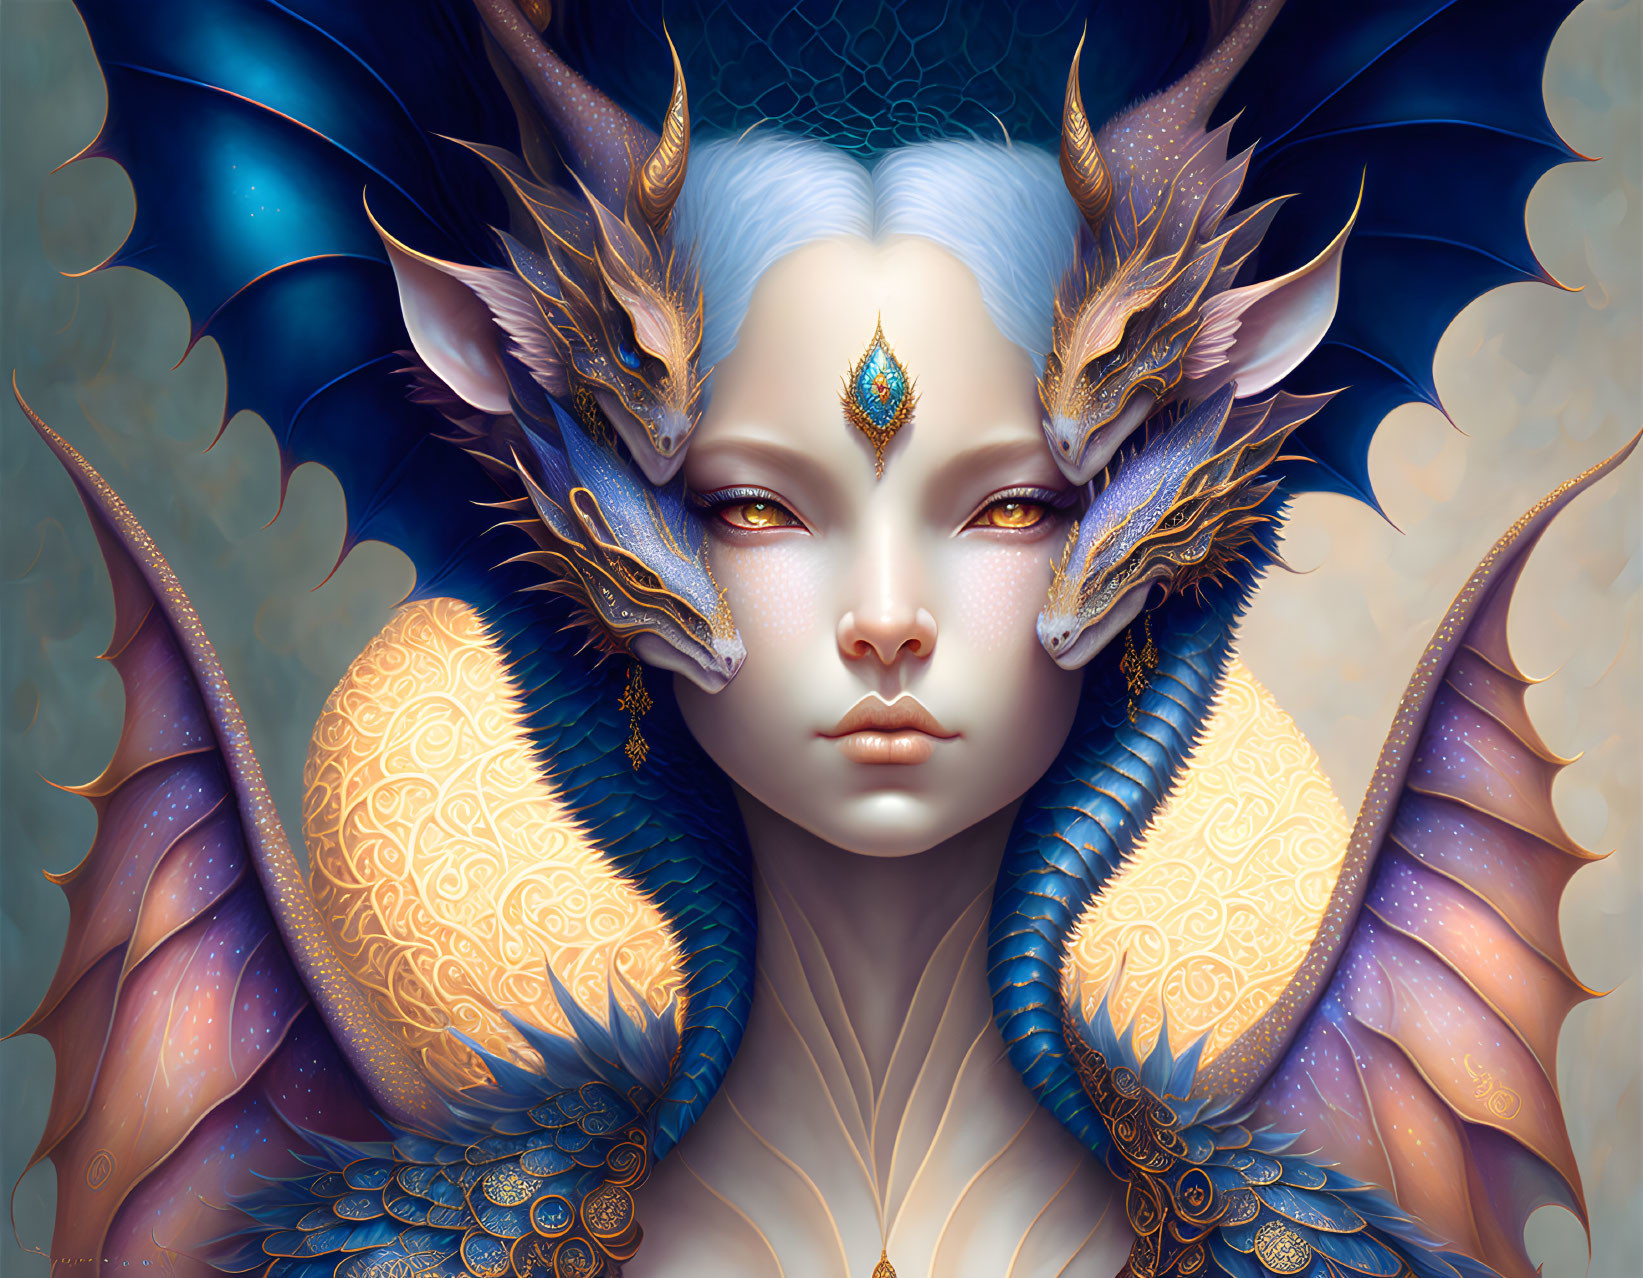 Blue-skinned creature with dragon wings and gold patterns.